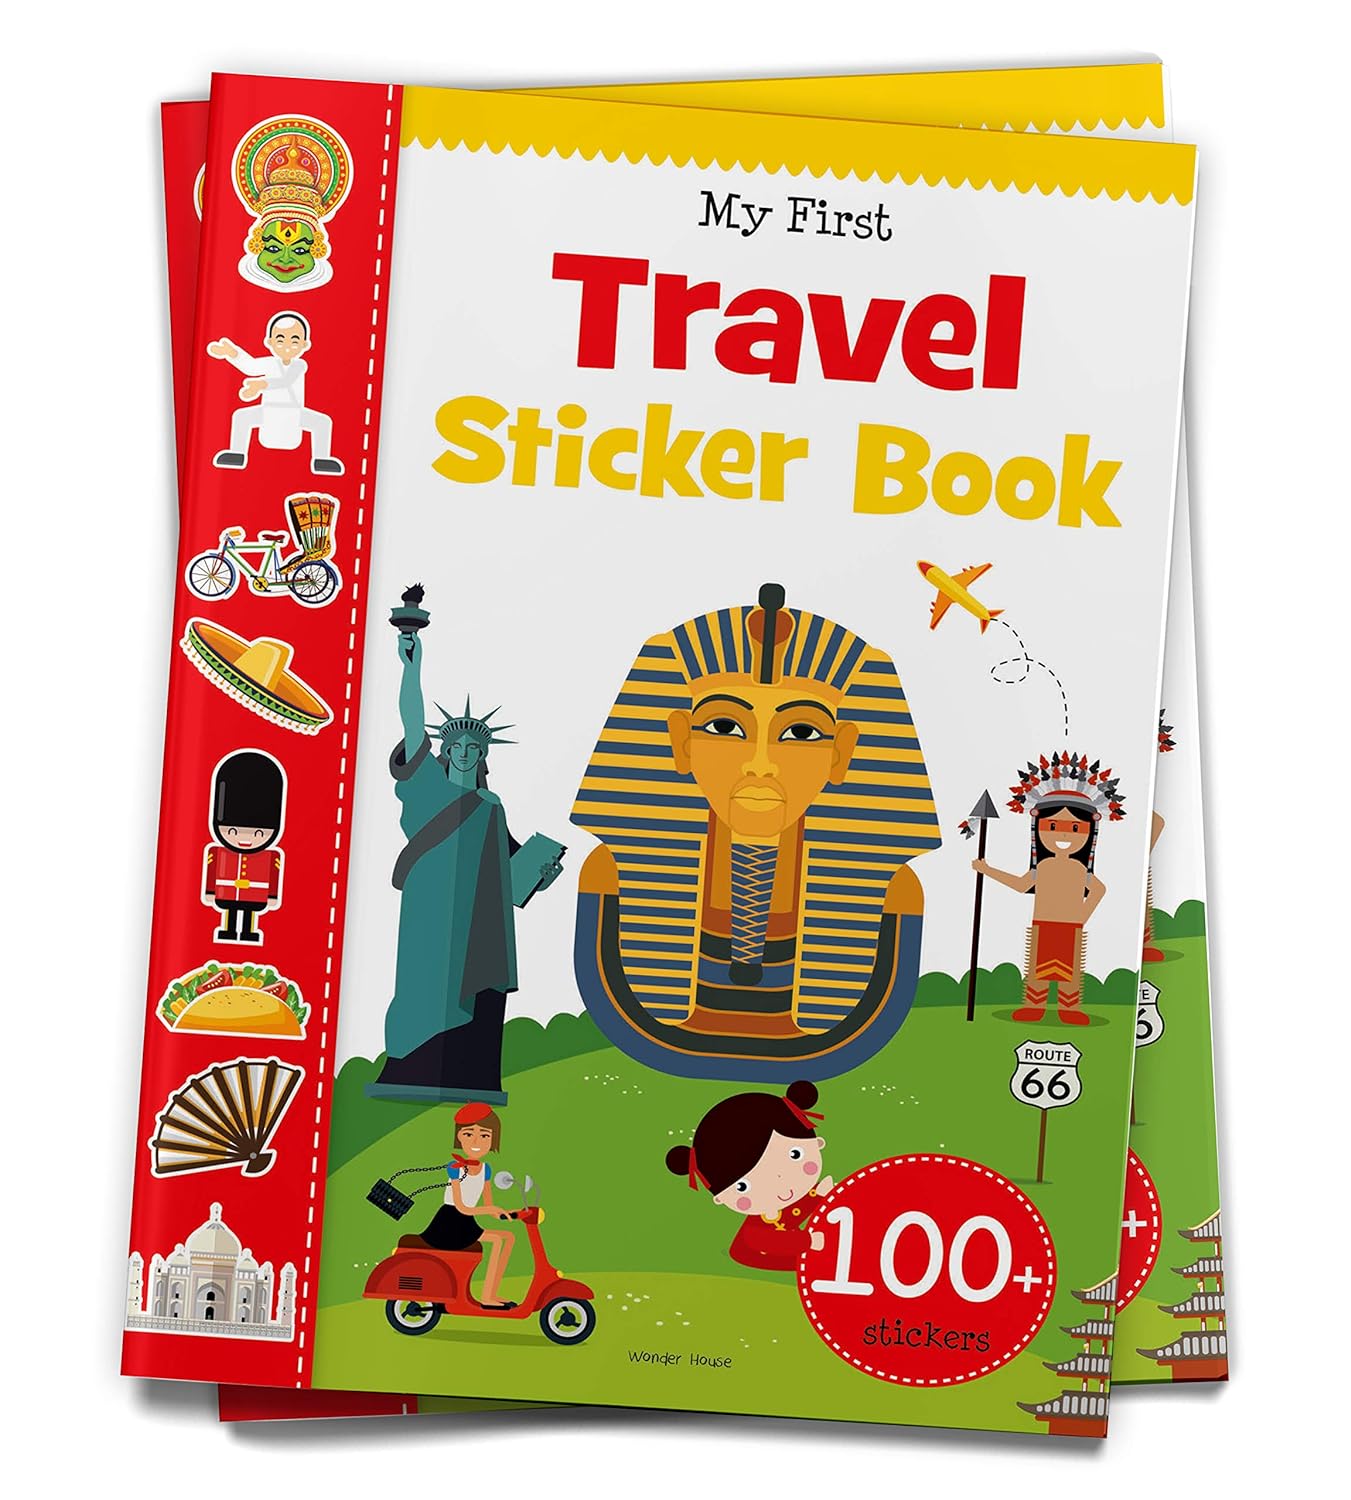 My first Travel Sticker Book: with 100+ Stickers